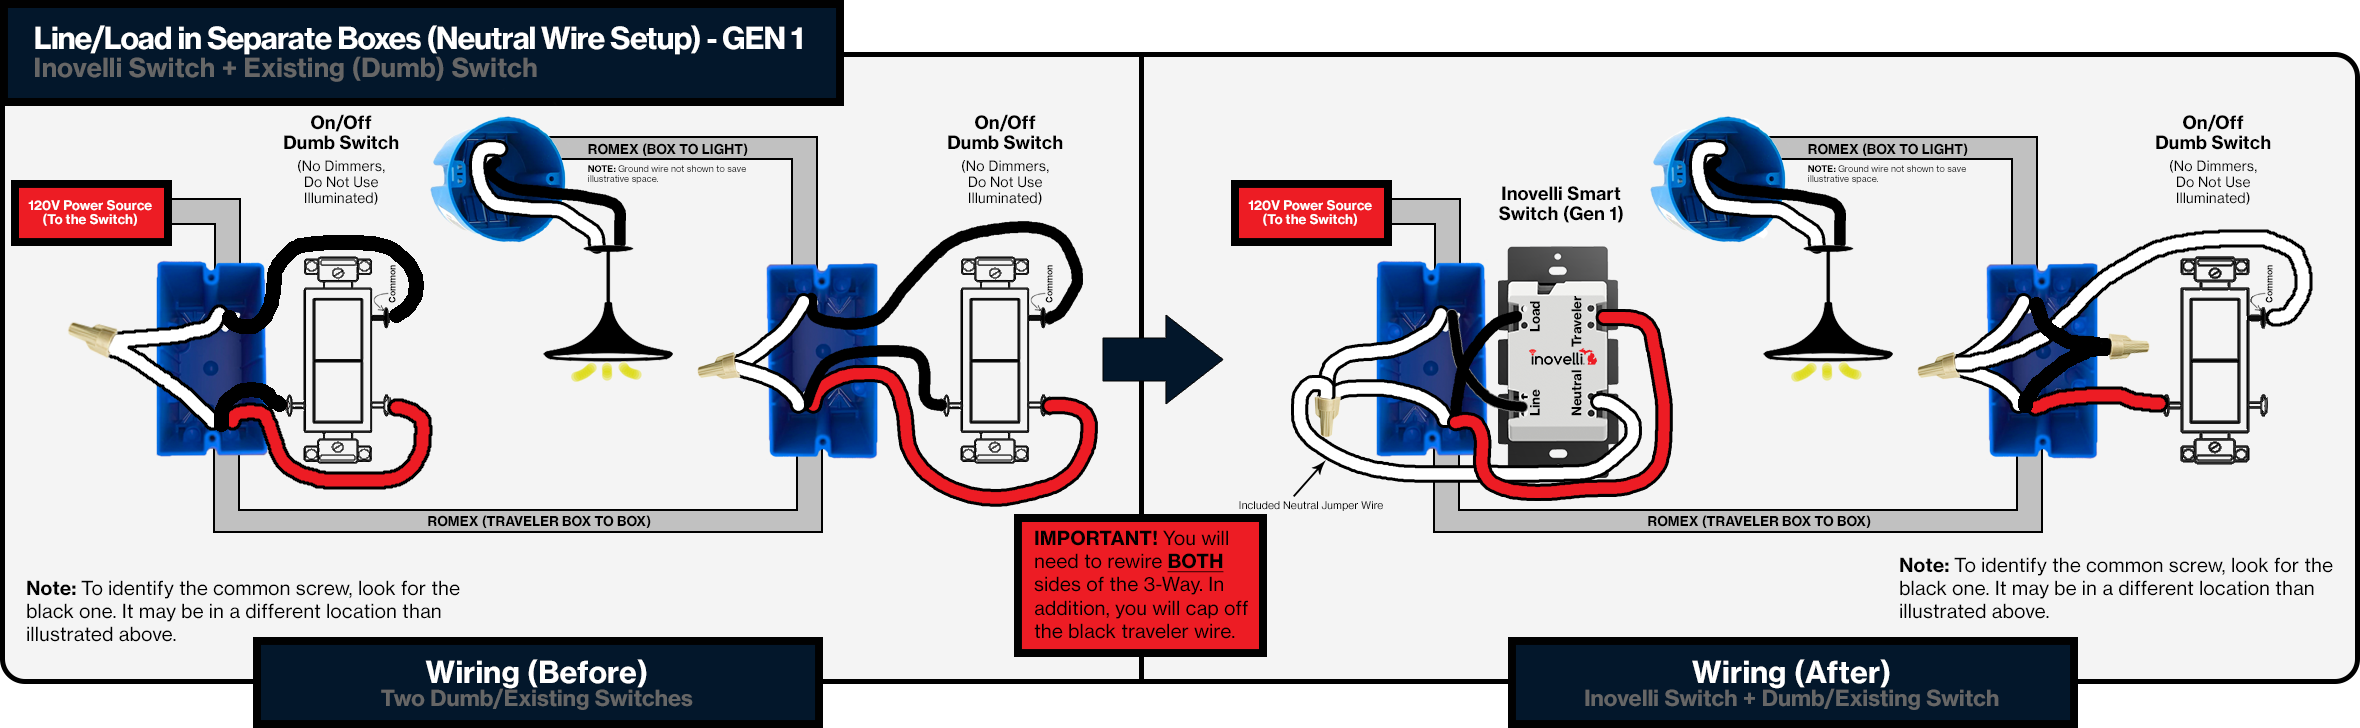 Wiring Diagrams For Dimmer Switches Gen 1